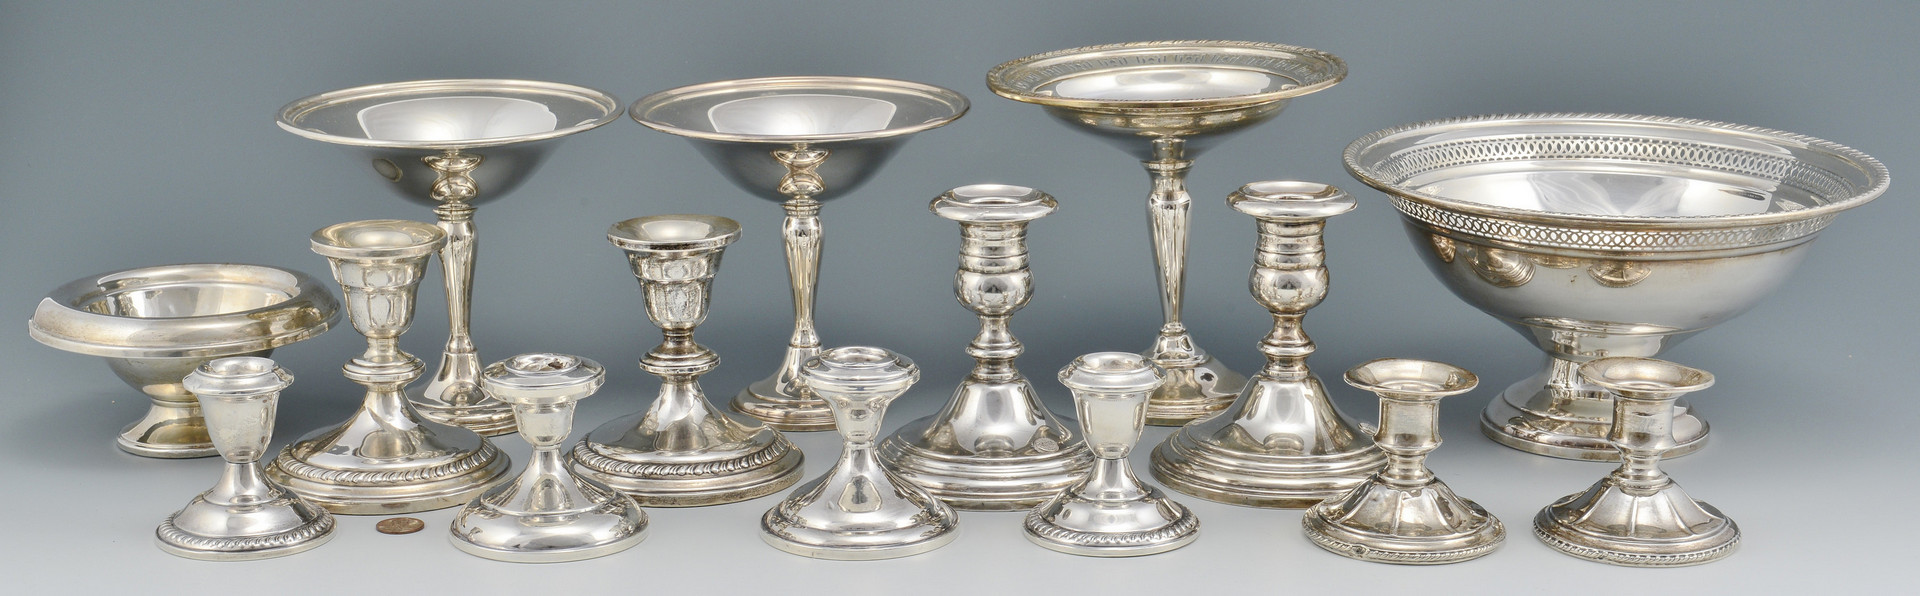 Lot 918: Sterling Silver Table Items, 15 pcs